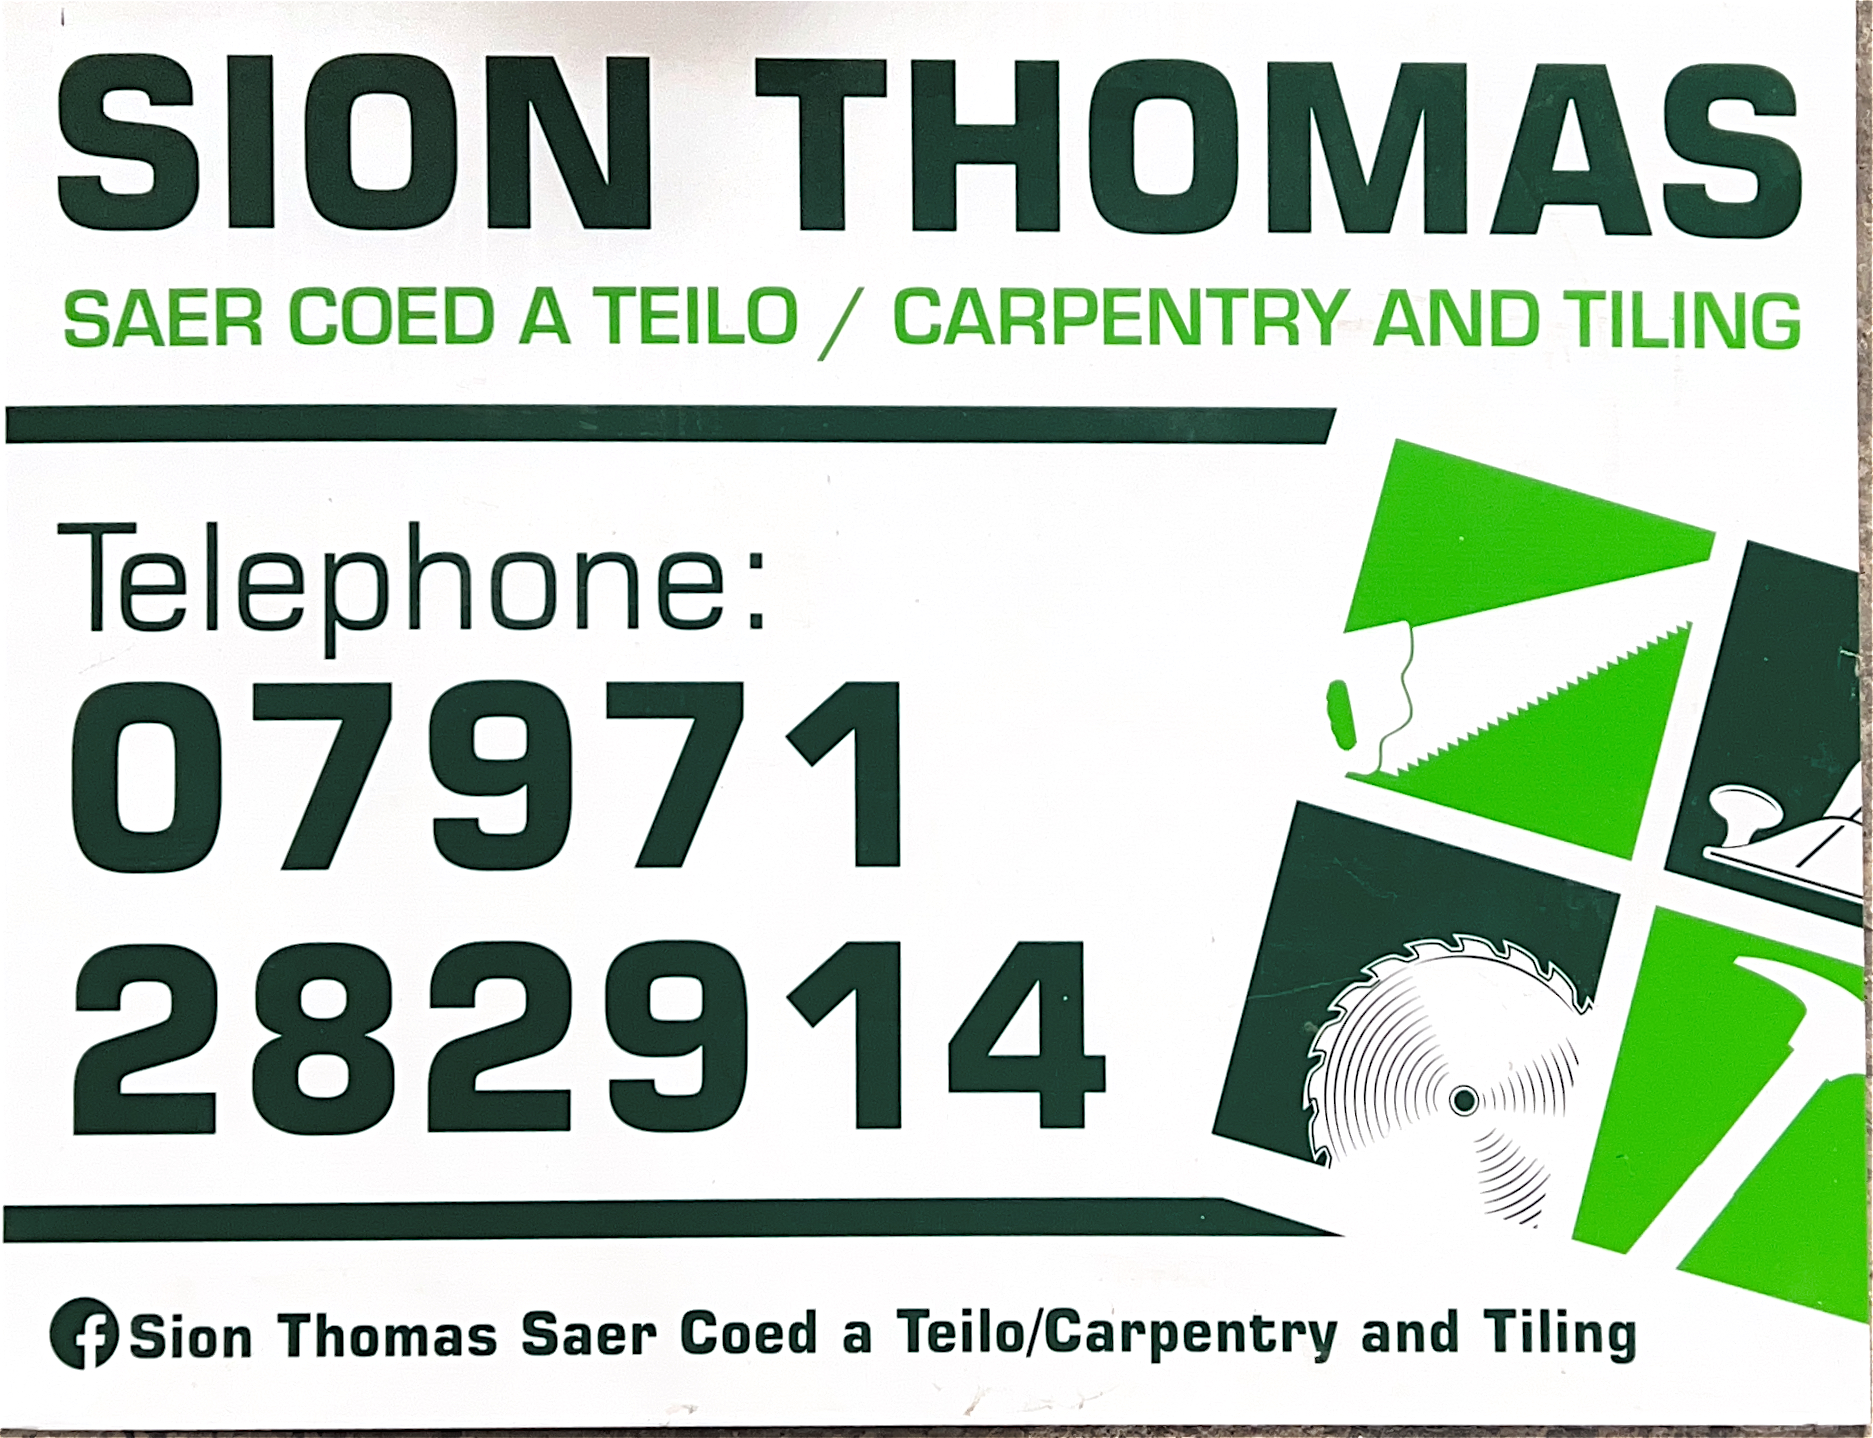 Sion Thomas Saer Coed a Teilo/Carpentry and Tiling